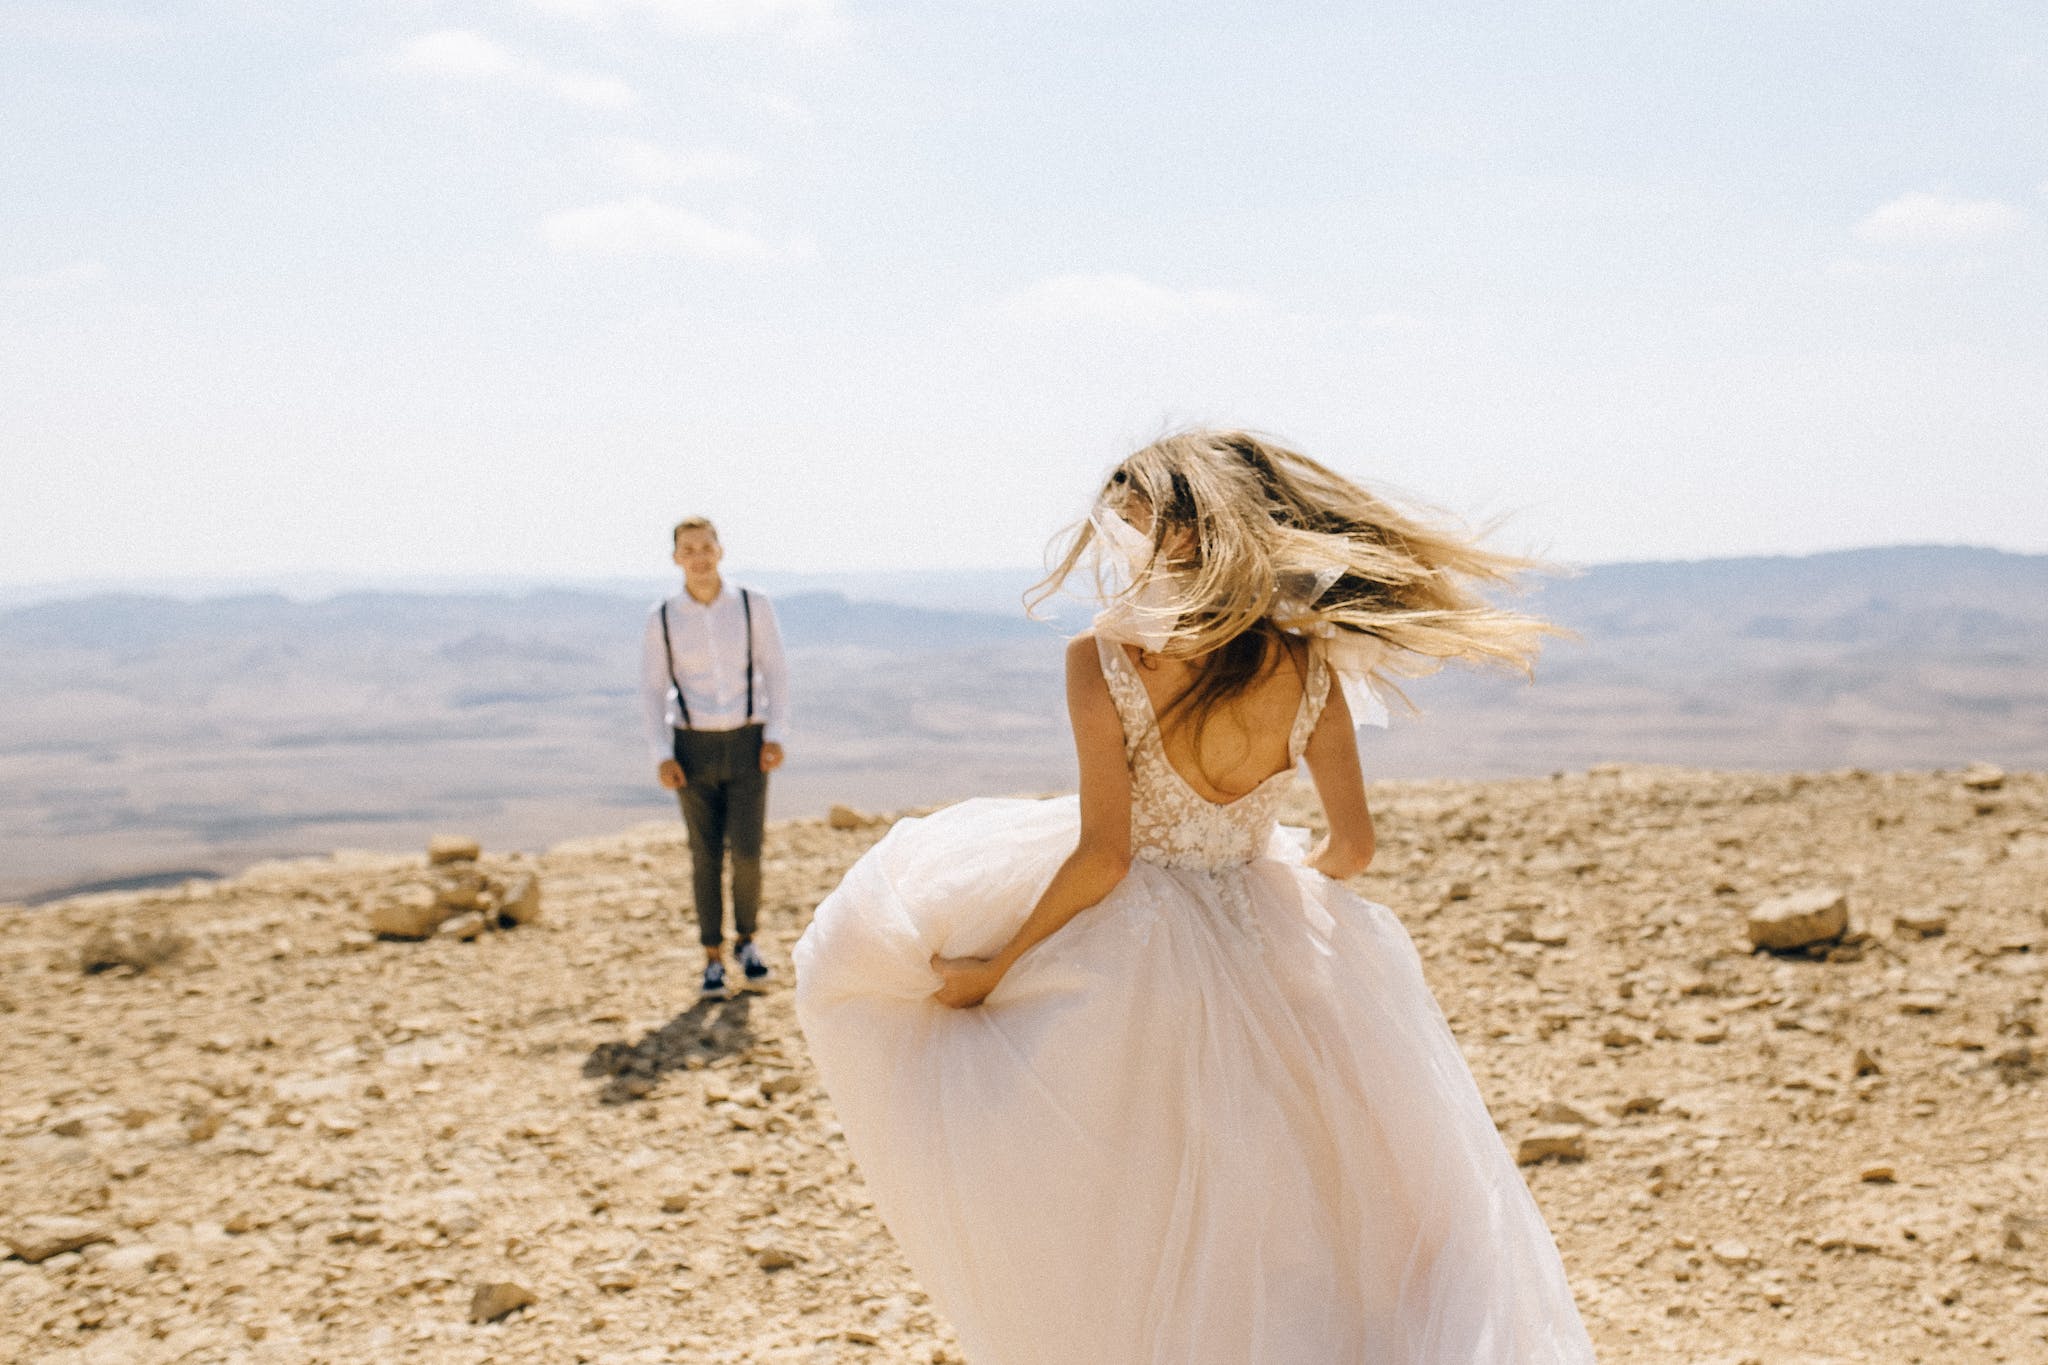 A Couple in The Desert Wearing Wedding Clothes